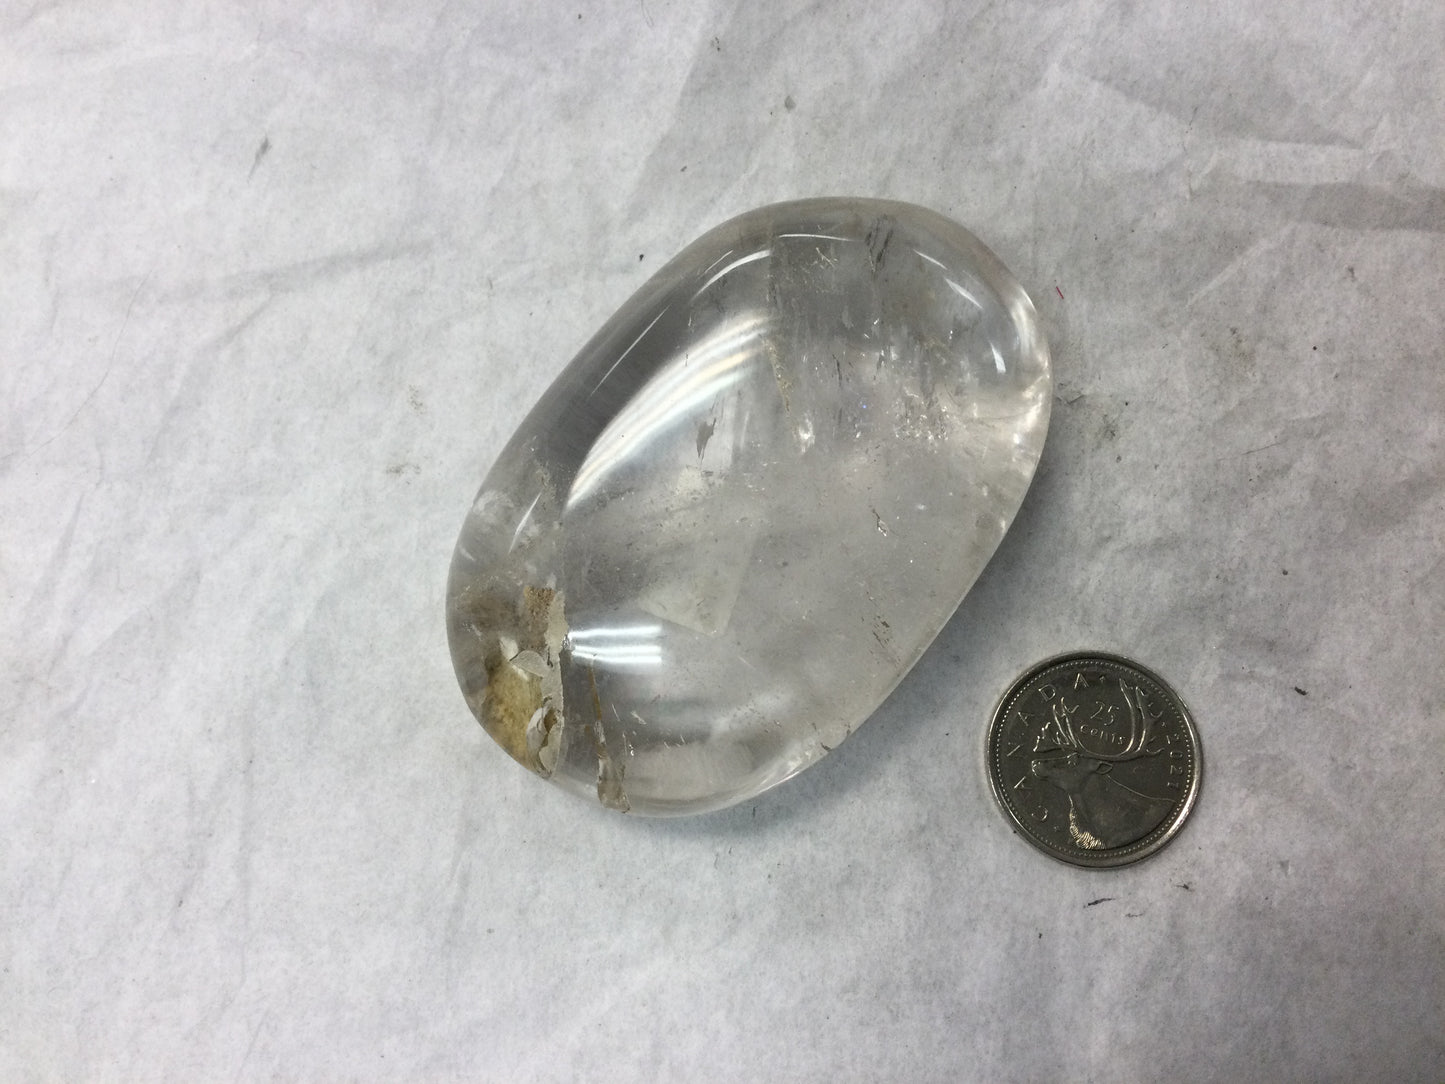 Clear Quartz with Inclusions Palm Stone